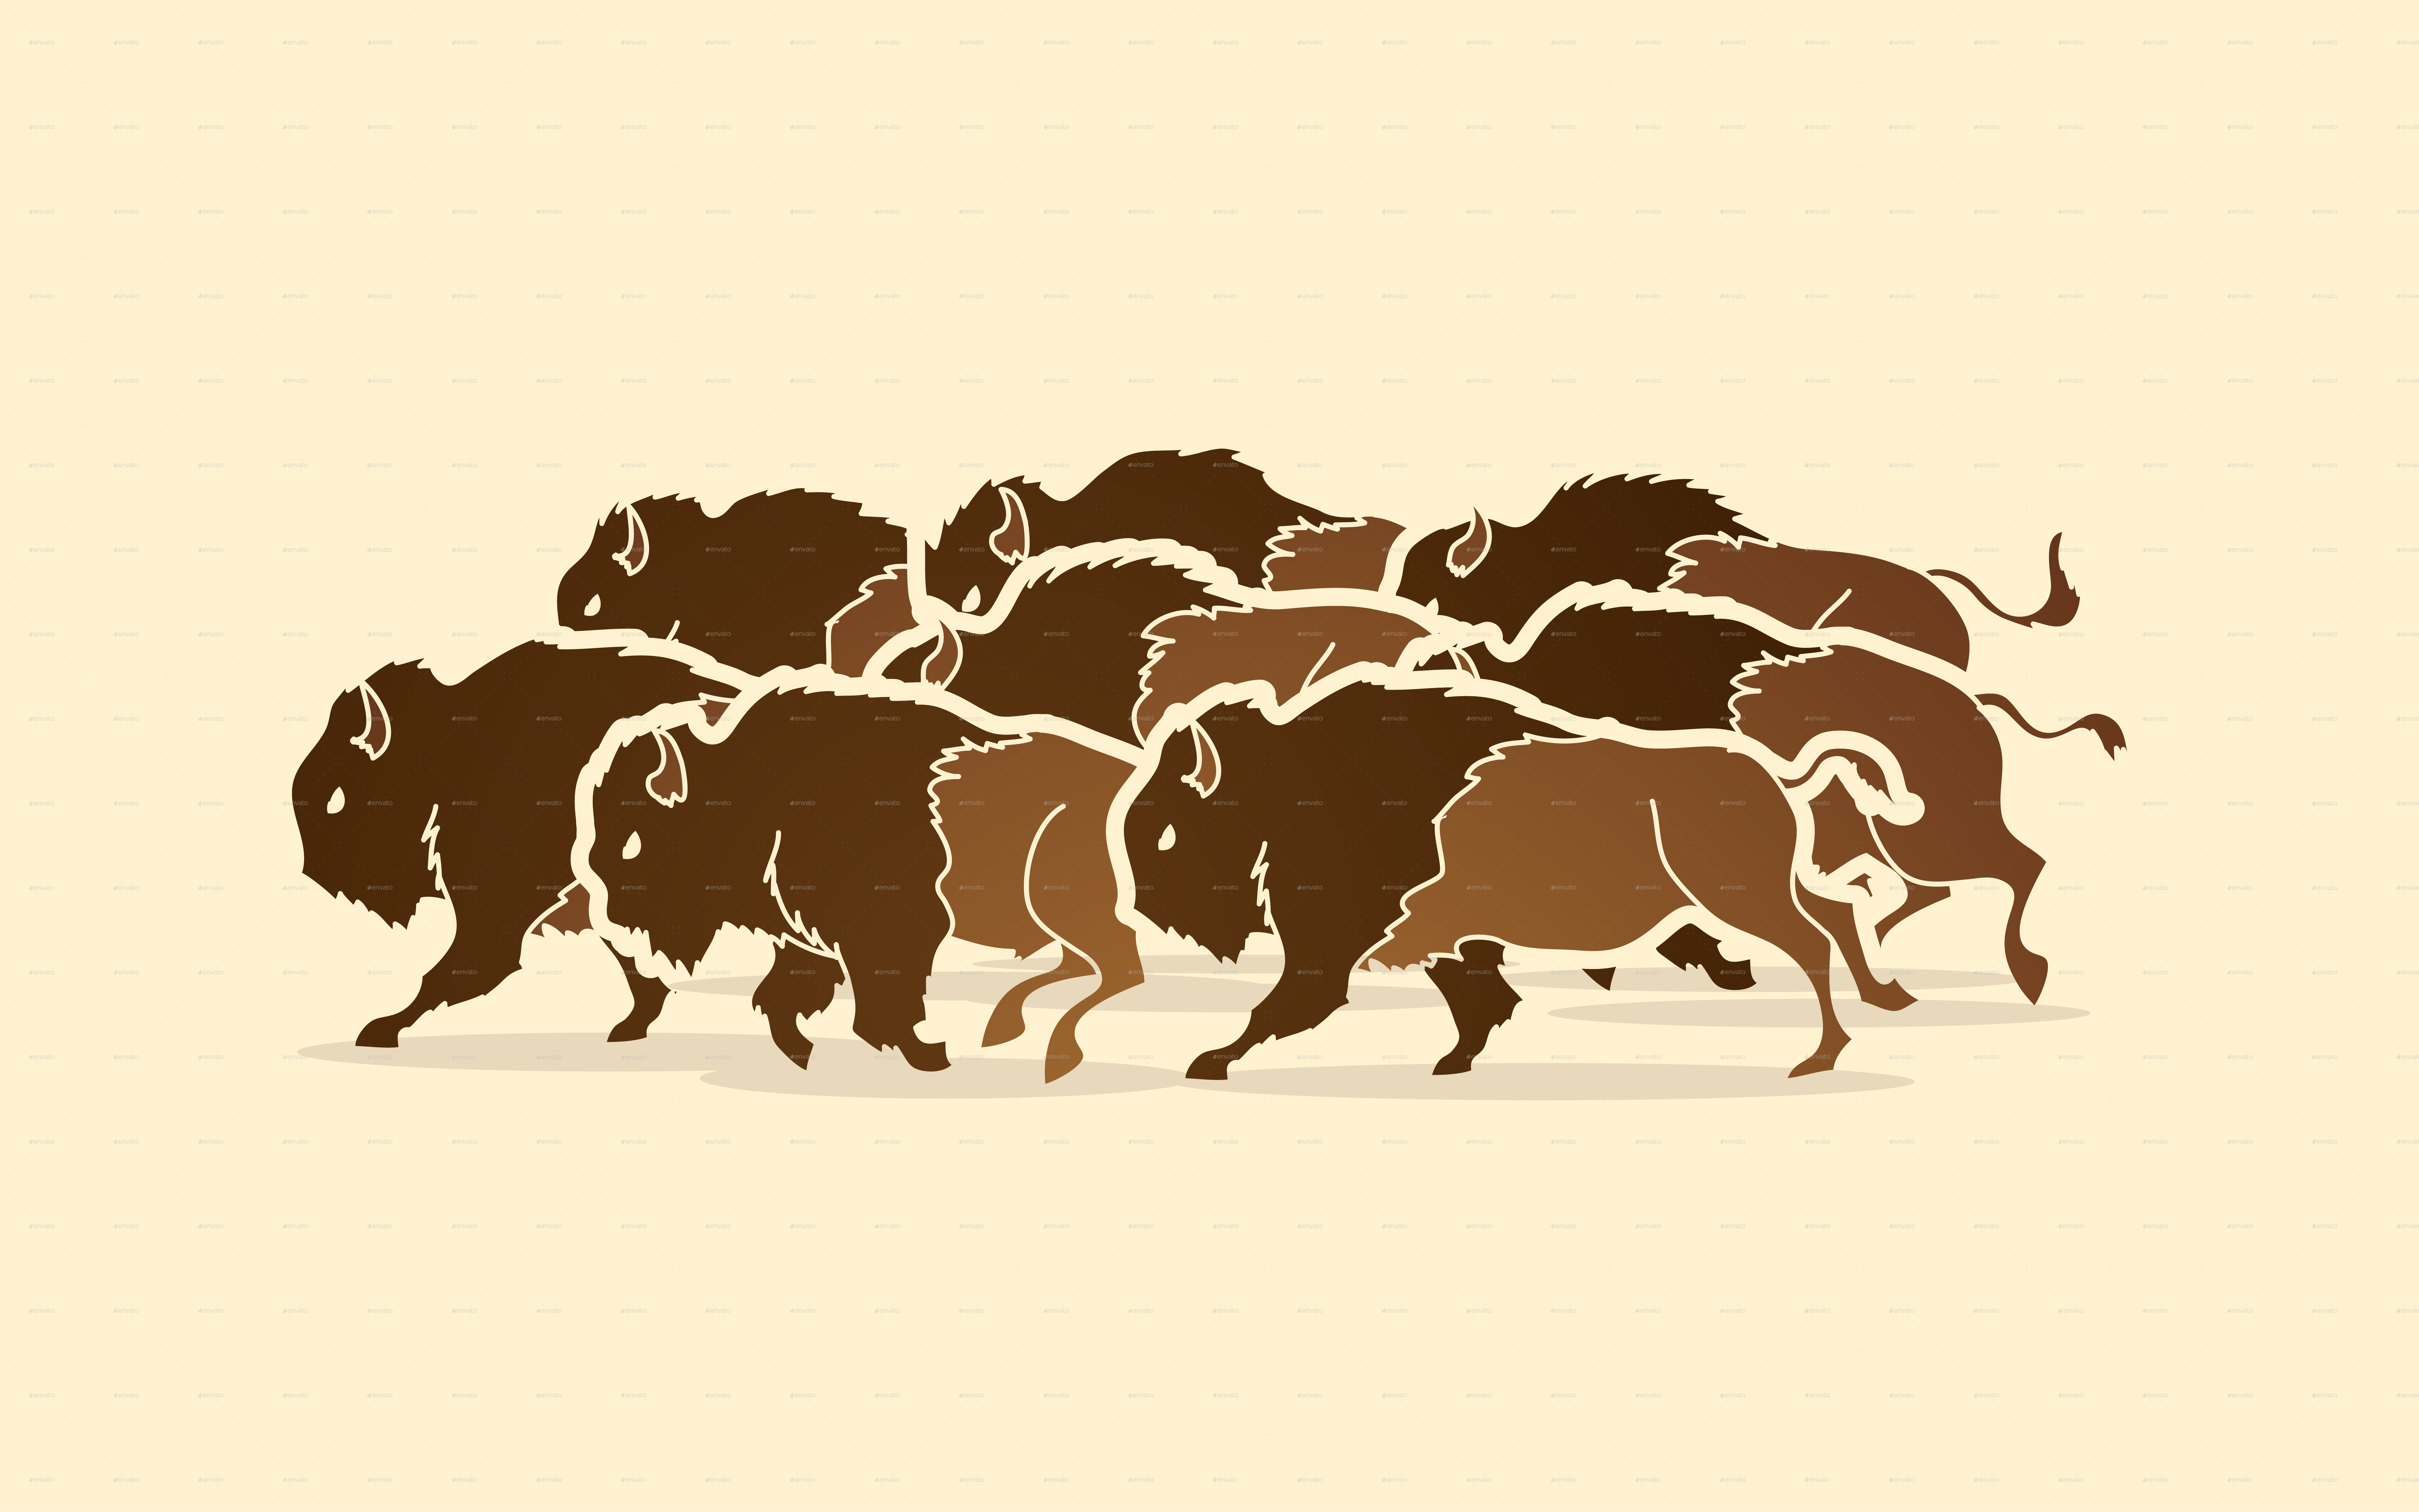 Bison Group of Buffalo Running sila5775 | GraphicRiver